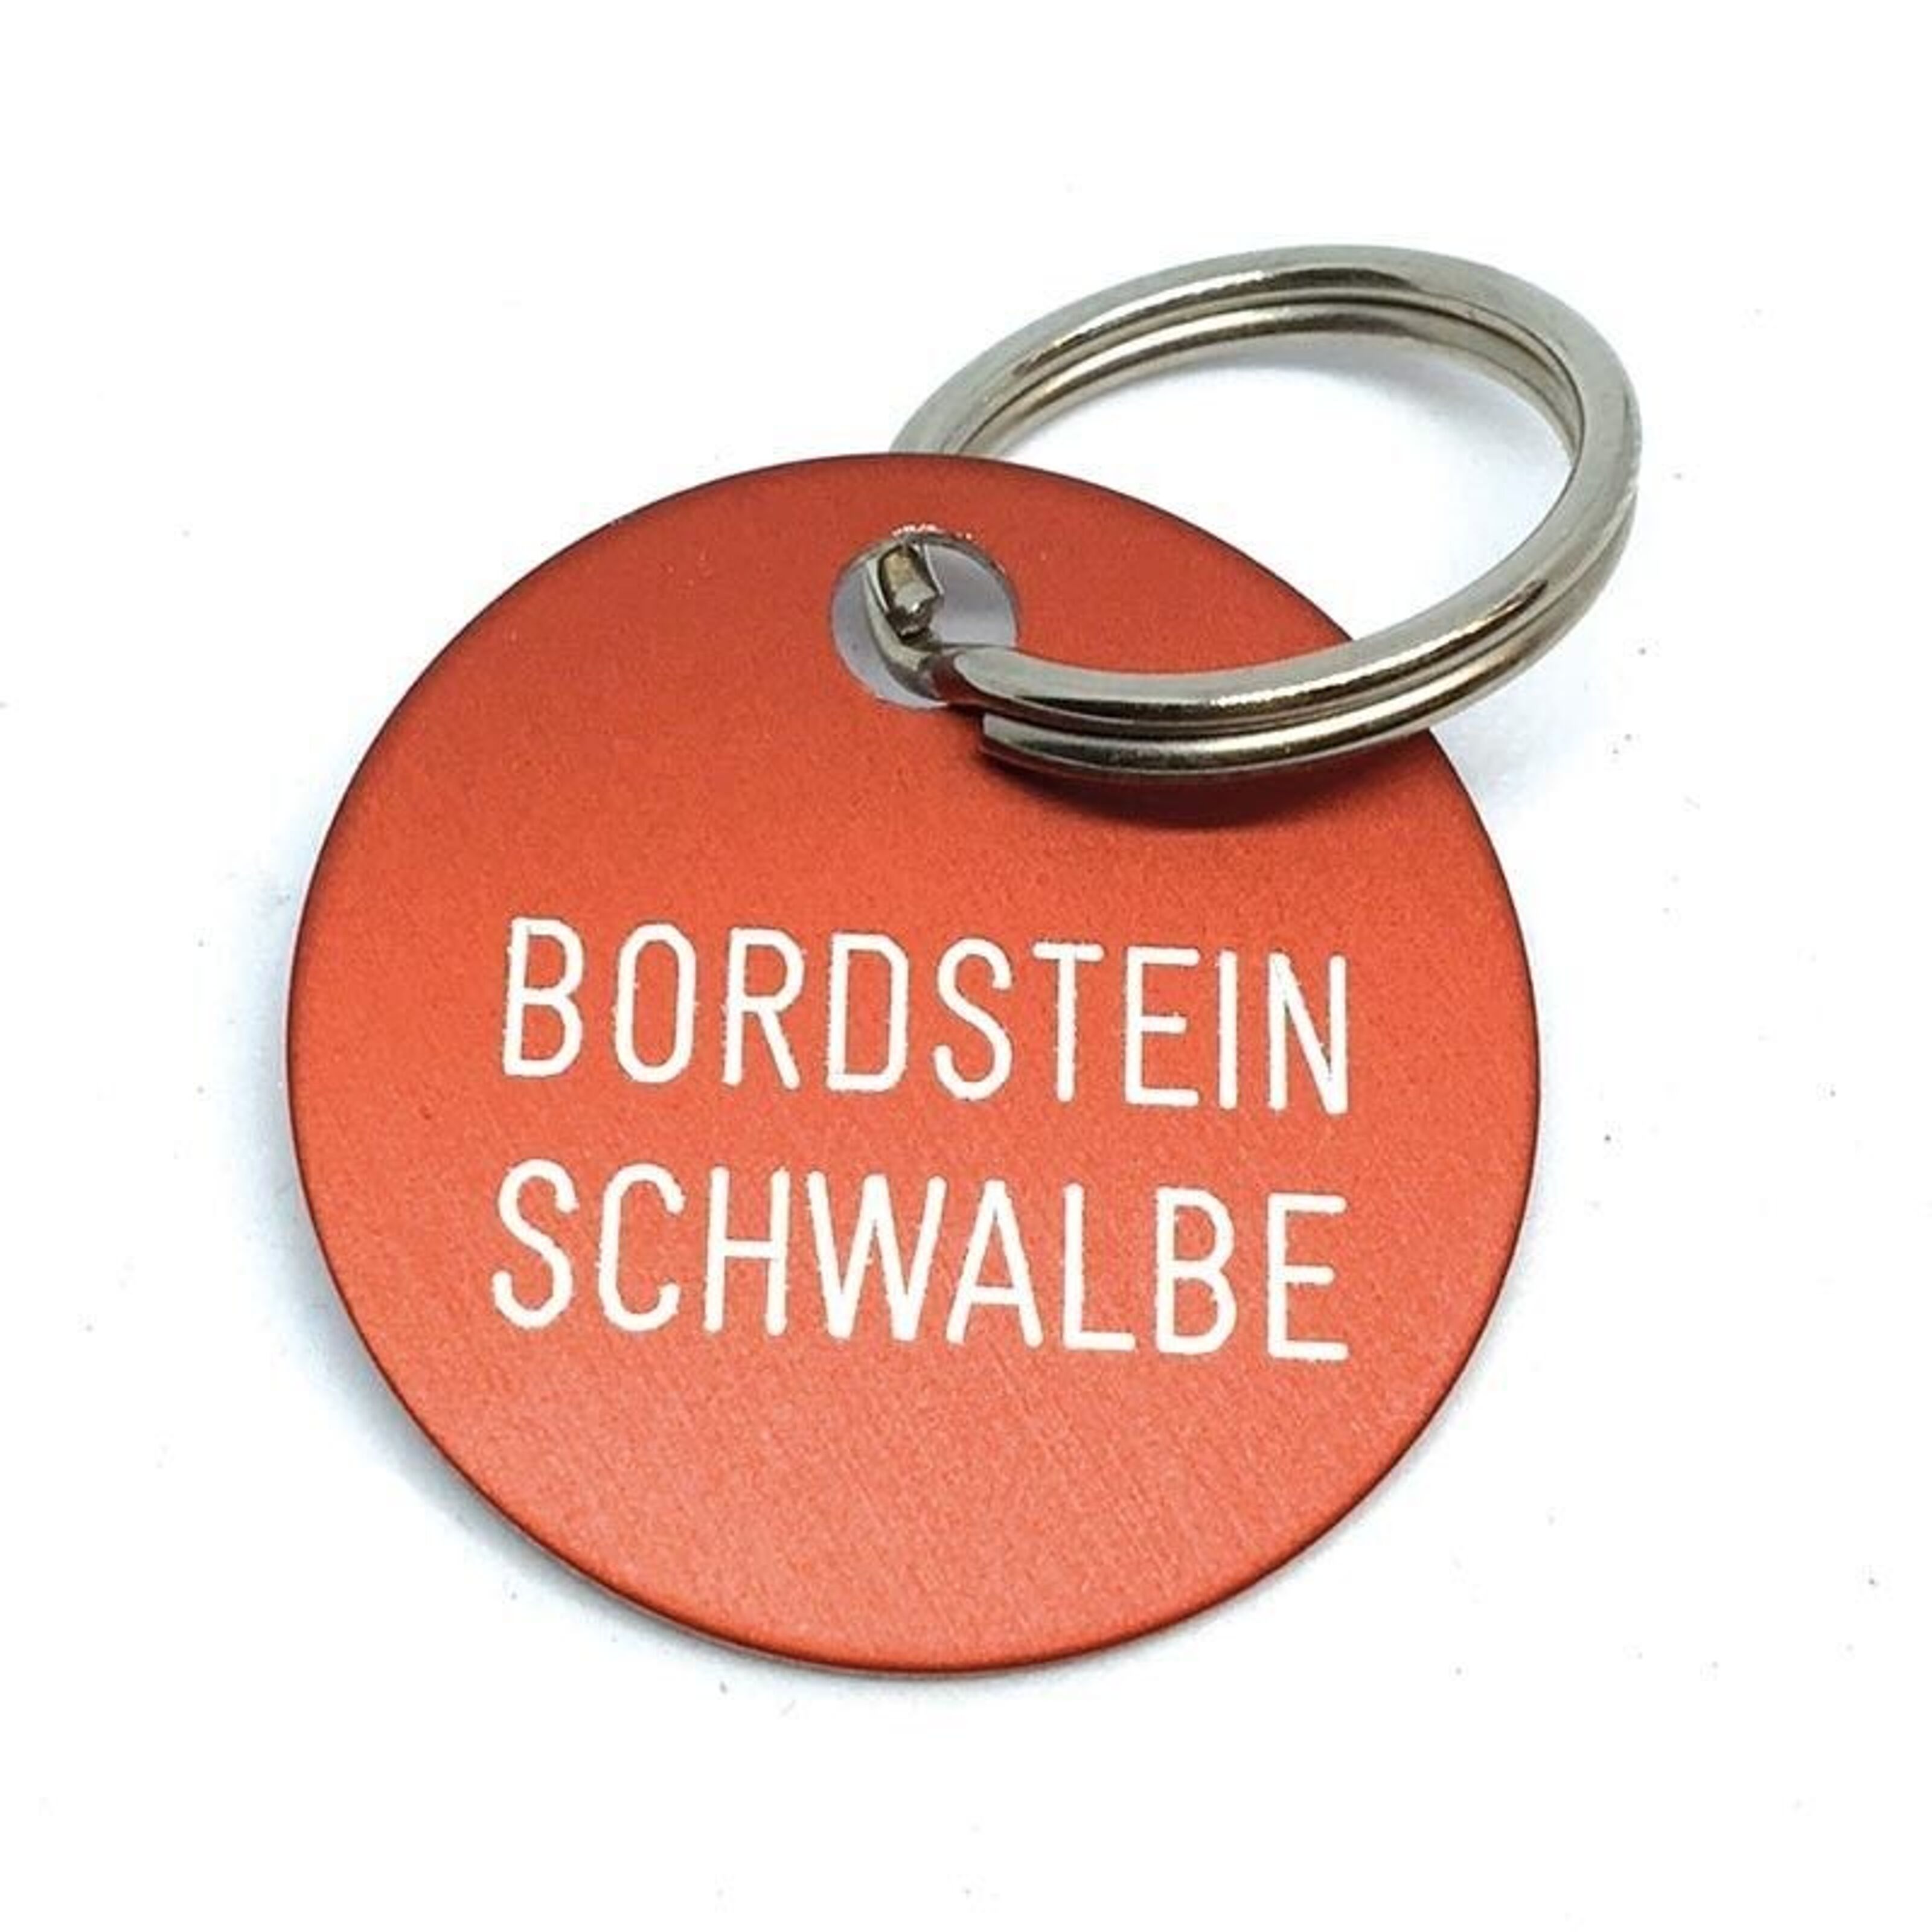 Buy wholesale Keychain and Swallow” items design Gift “Curbstone